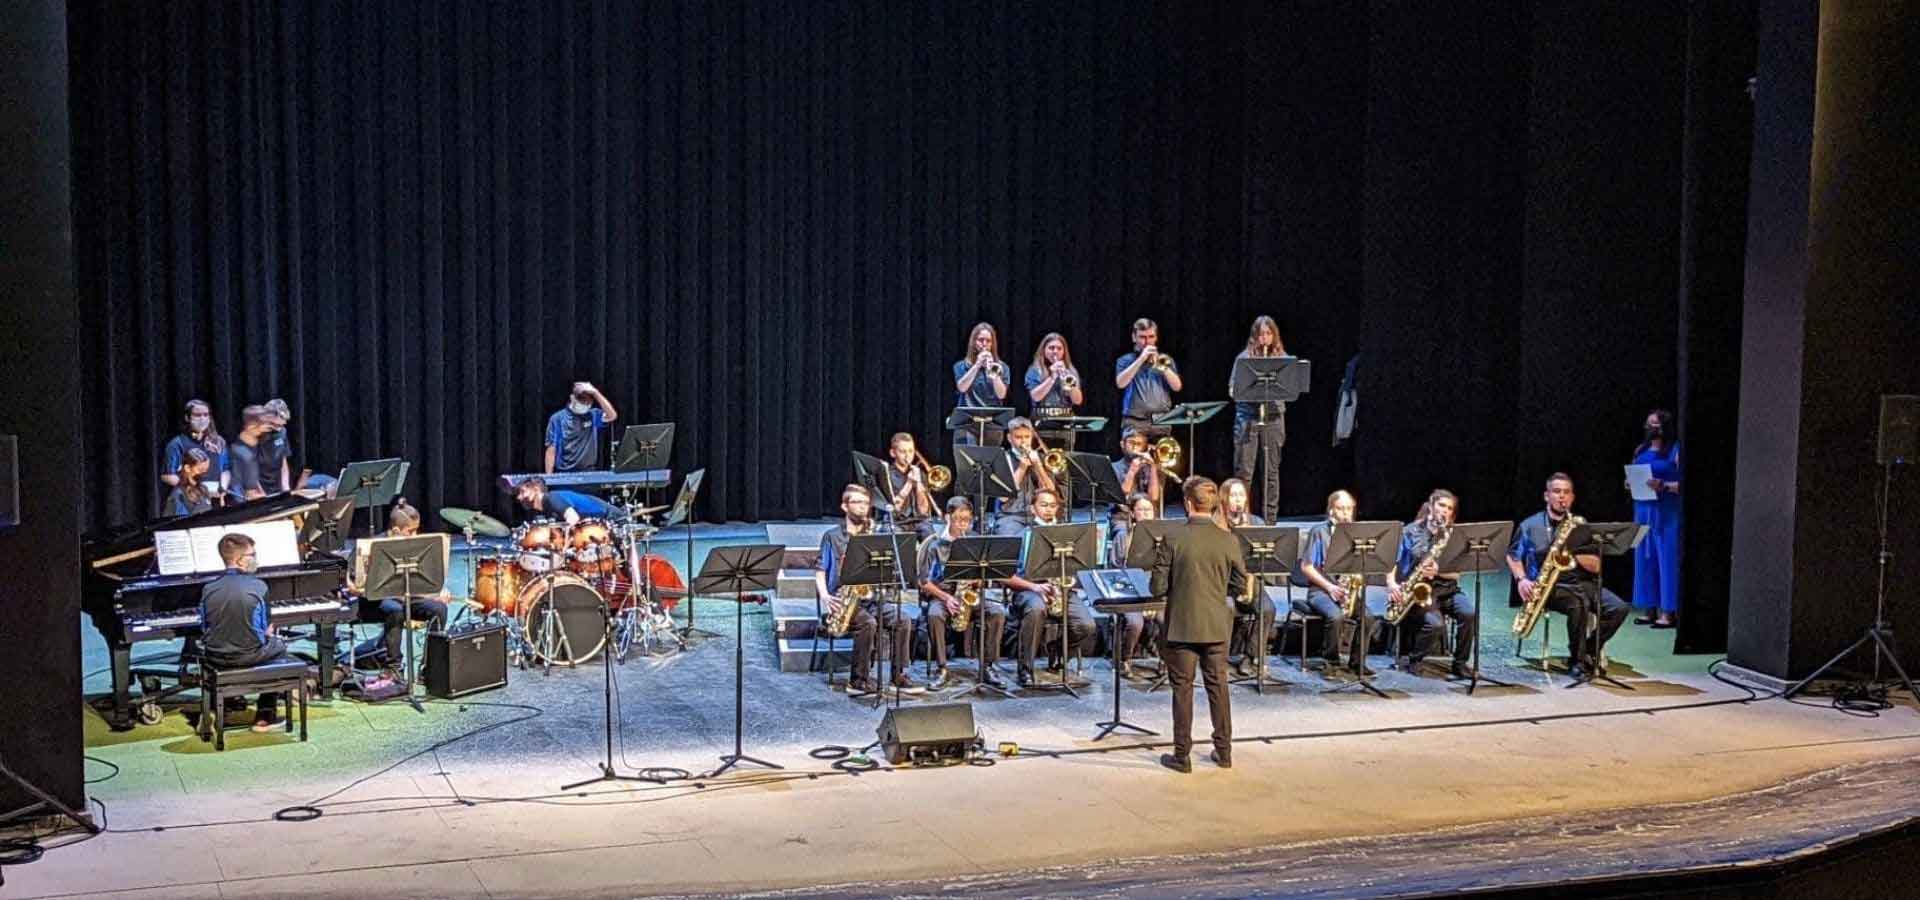 Division 1 Rating for HCMS Jazz Band